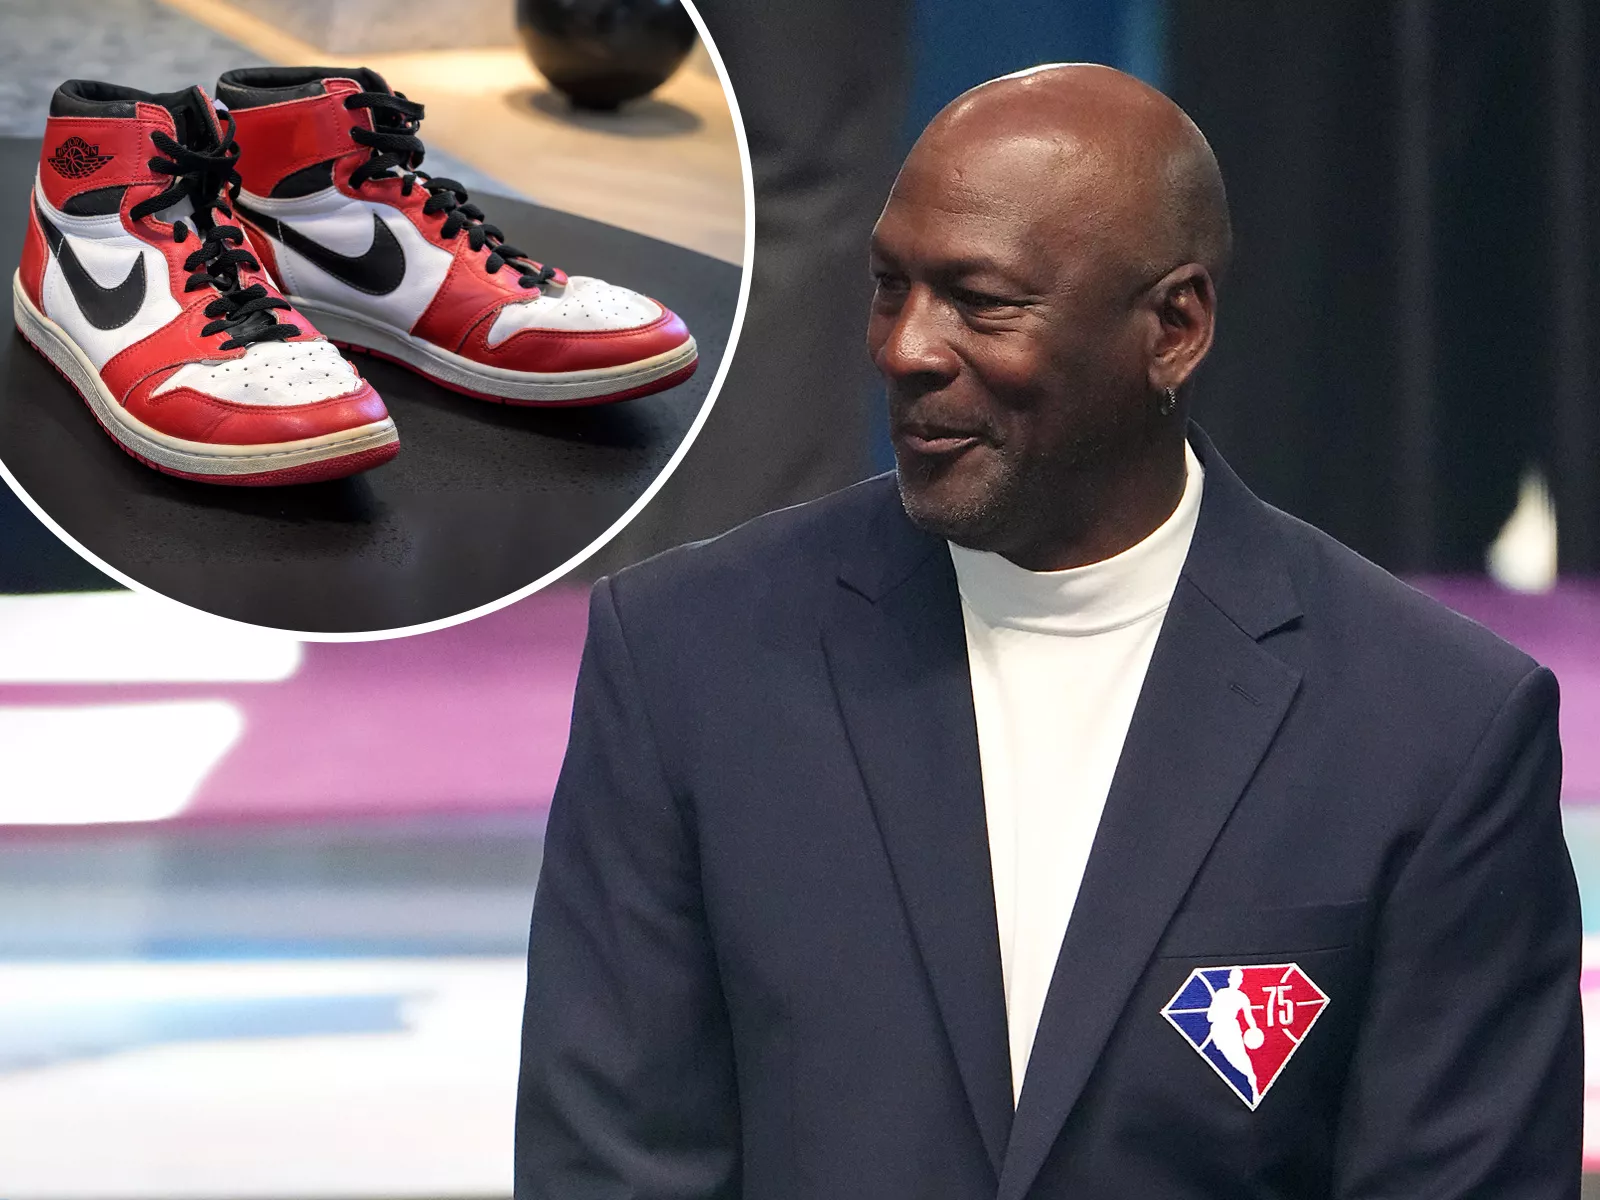 Betting on a Legend - The Story of Nike's Air Jordan Shoe - Young